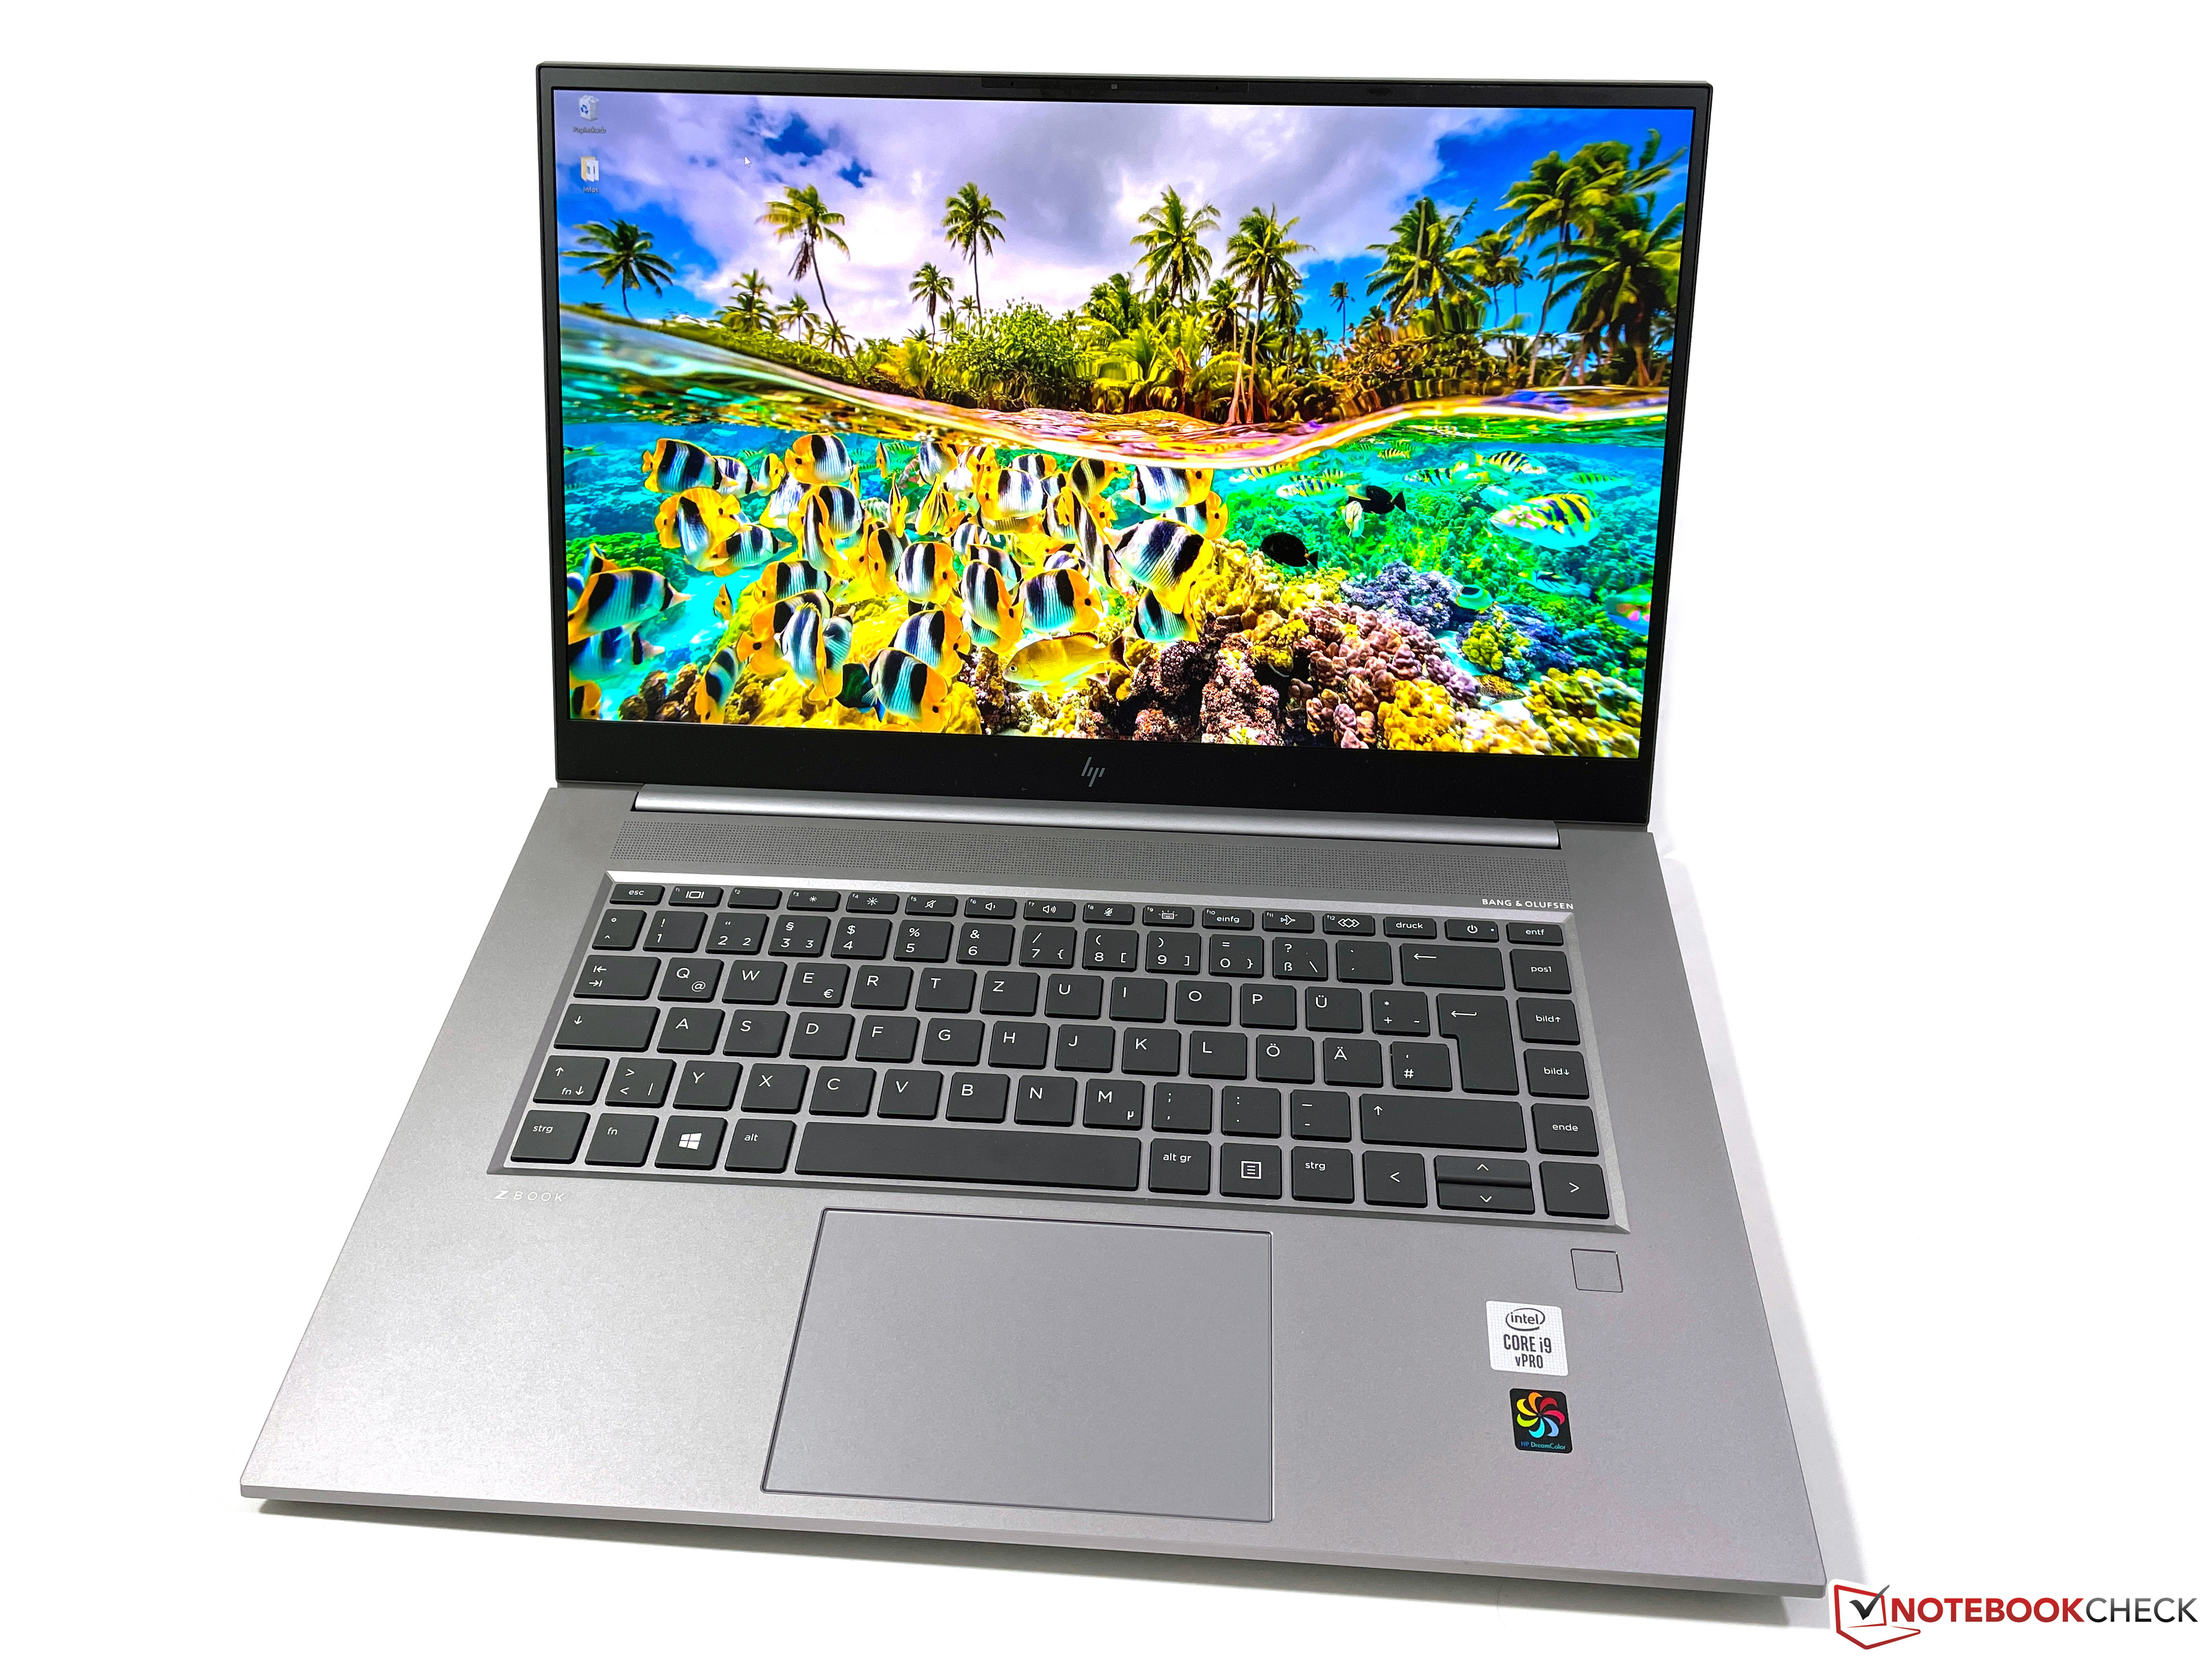 Hp Zbook Studio G7 Laptop Review The Best Mobile Workstation Thanks To Vapor Chamber And Dreamcolor Notebookcheck Net Reviews